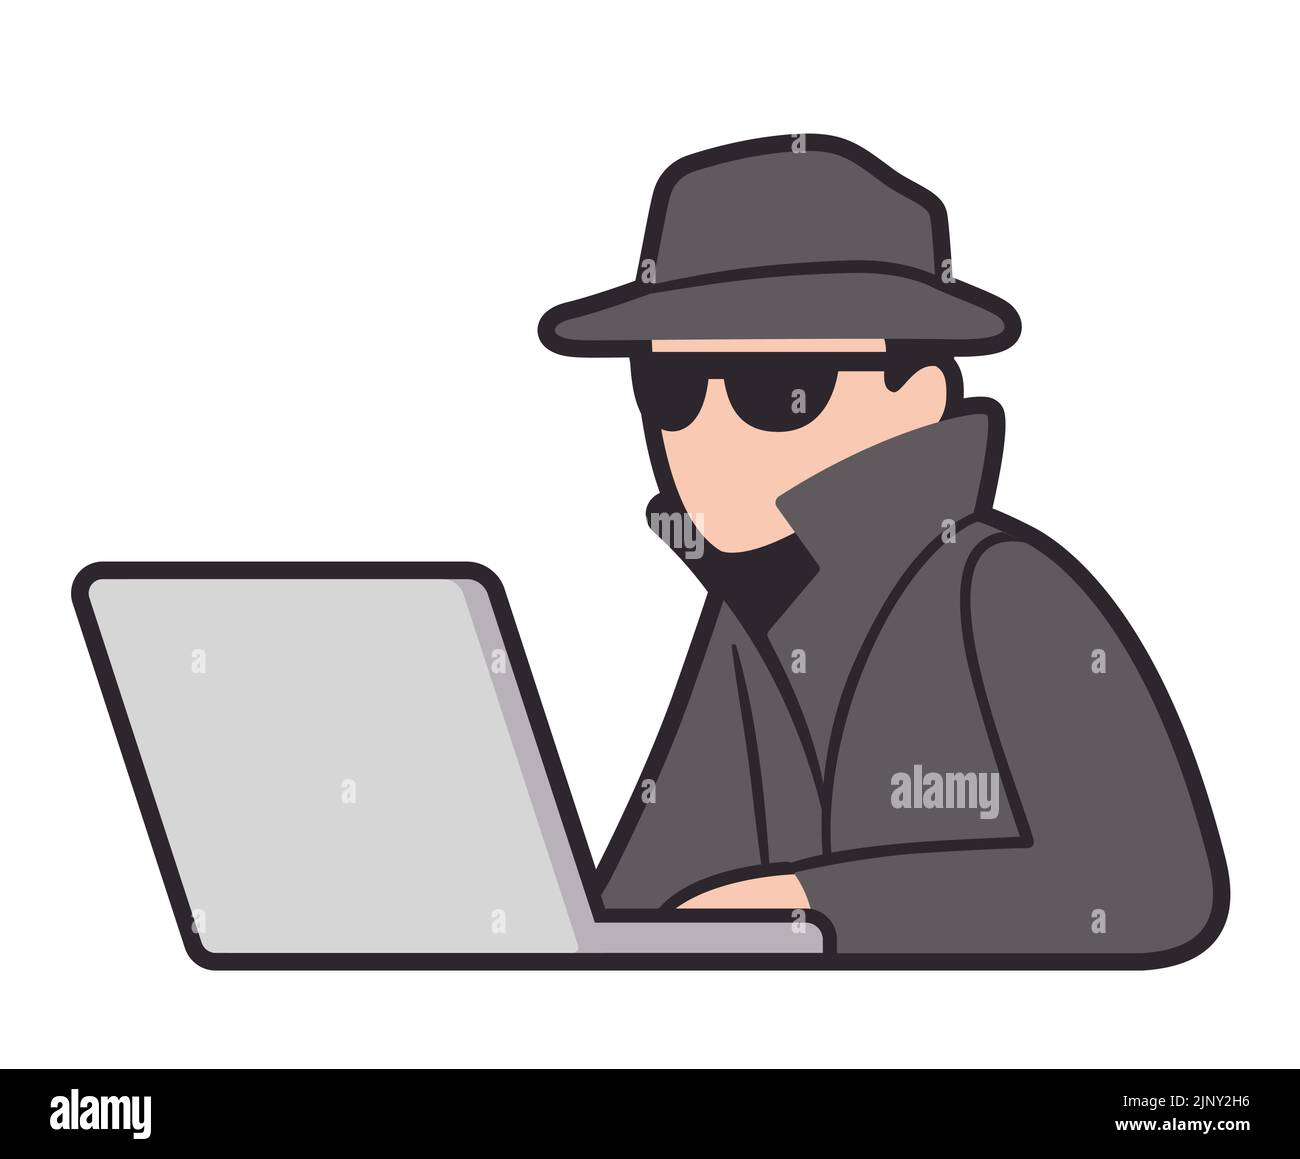 Spy agent with laptop getting access to confidential information. Surveillance and privacy vector illustration. Stock Vector